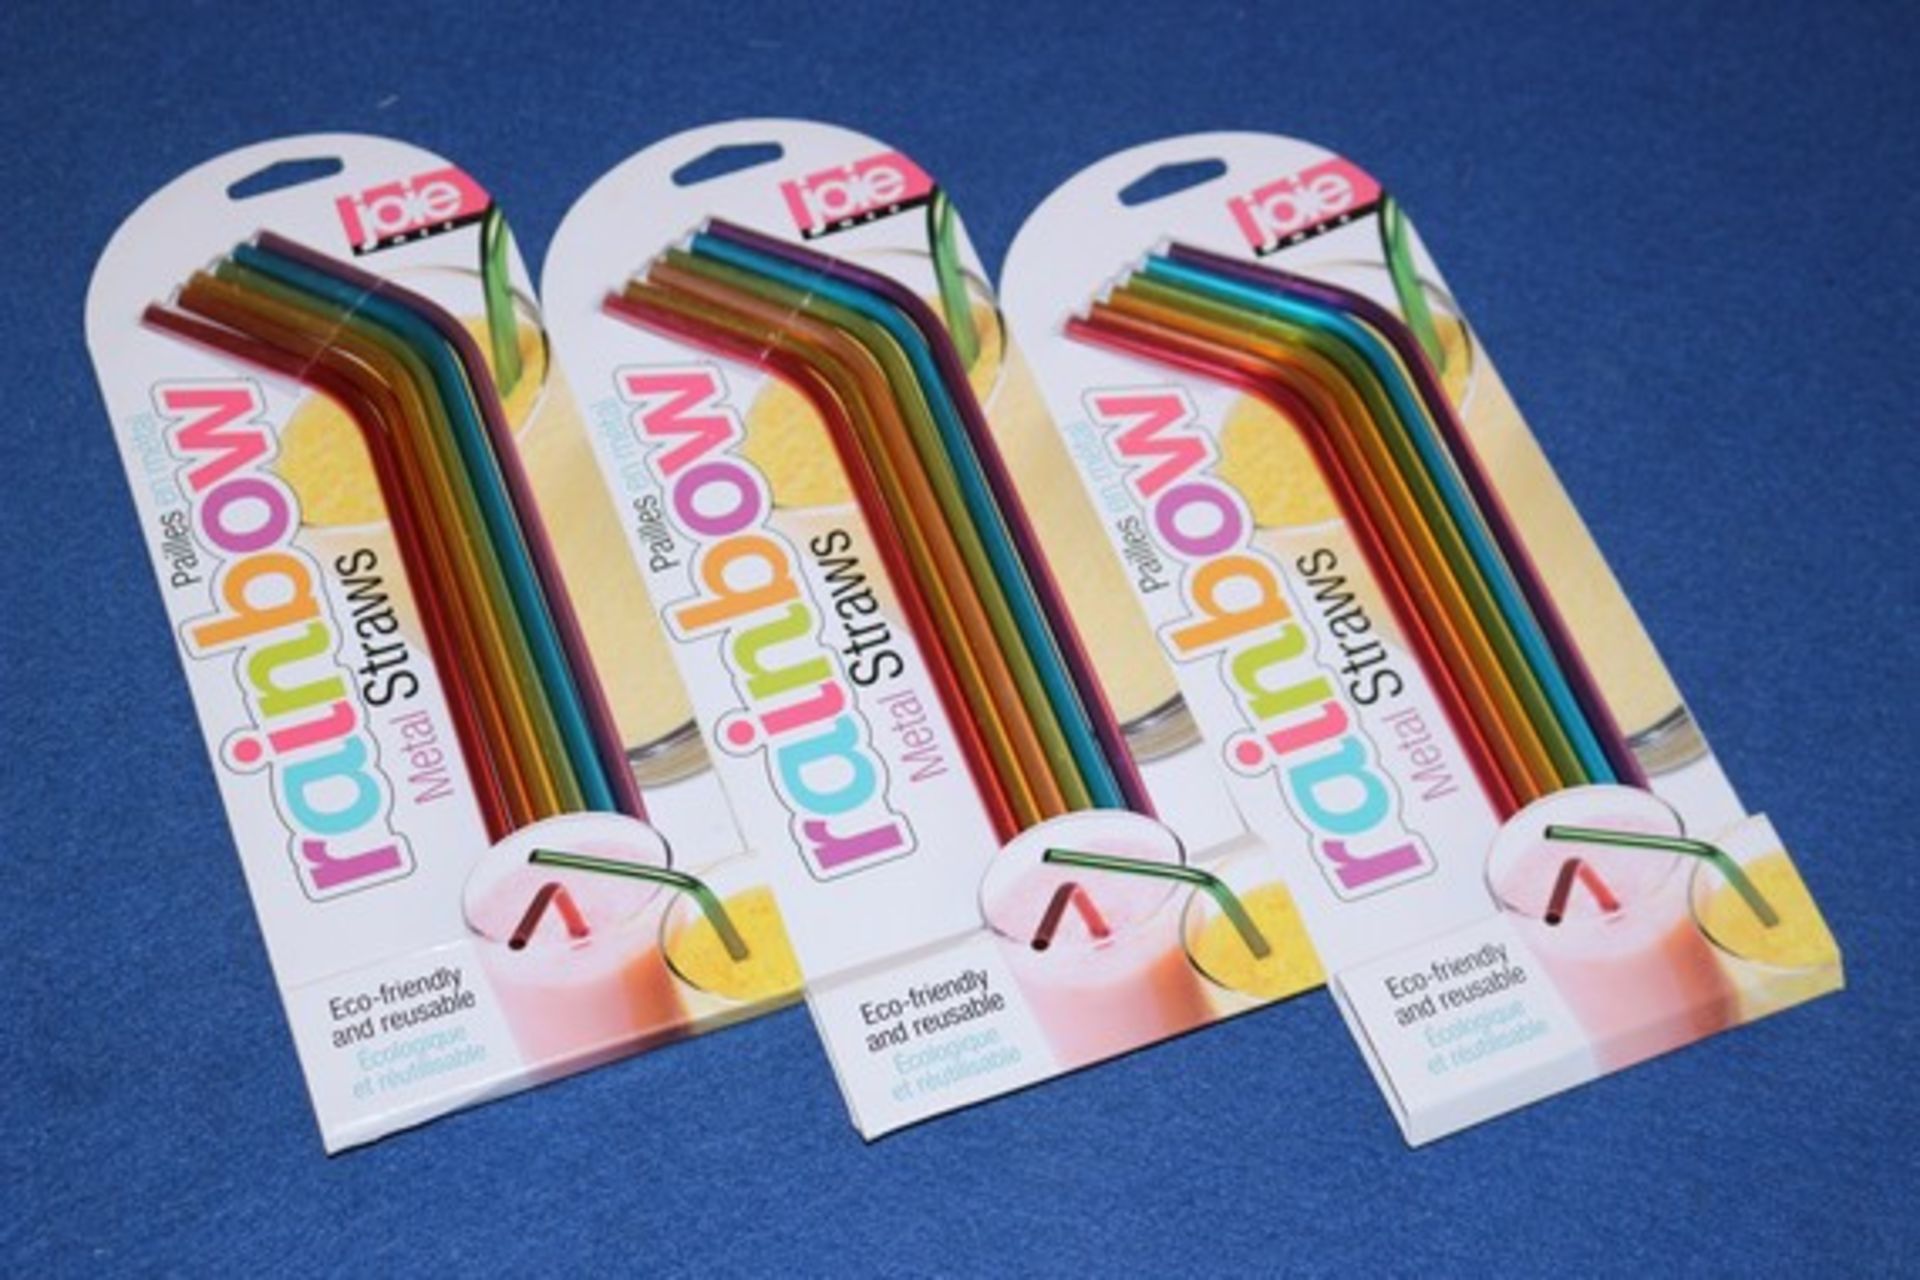 10 x SETS OF JOIE RAINBOW METAL STRAWS (06.08.18) (36) *PLEASE NOTE THAT THE BID PRICE IS MULTIPLIED